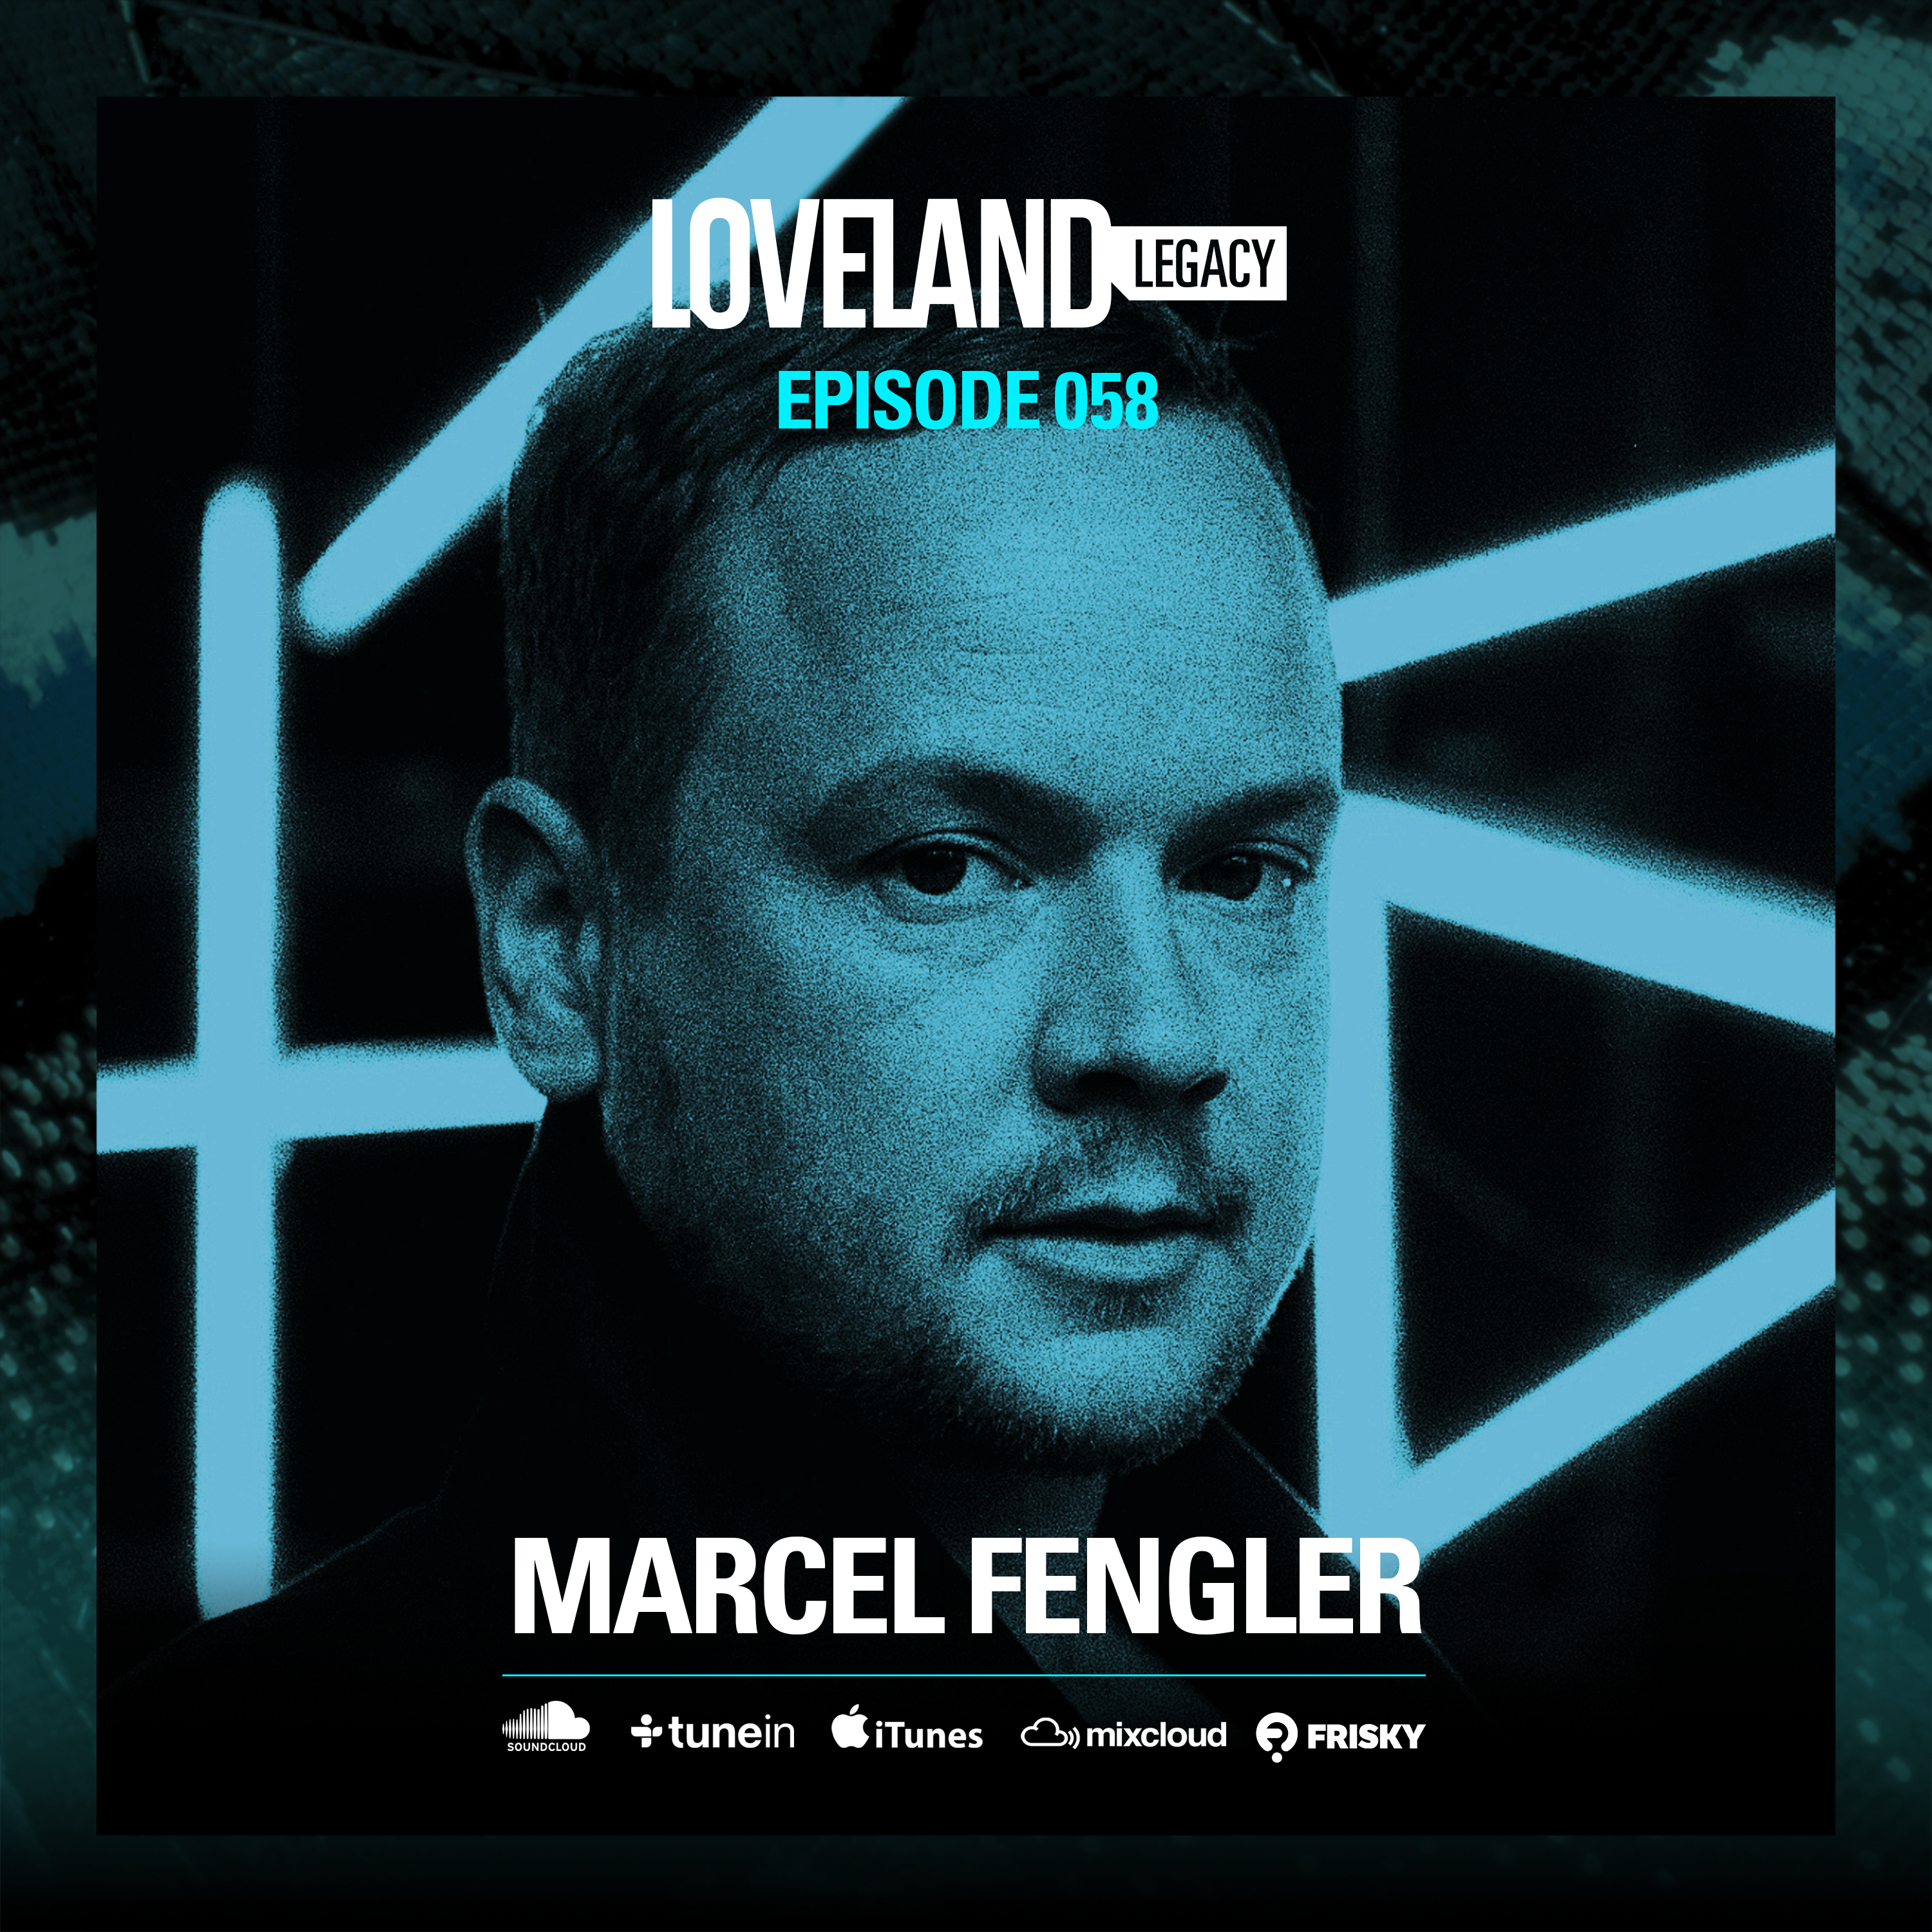 This week's show comes from non other than IMF Label Boss Marcel Fengler. His crafted DJ sets are characteristically offensive and dynamic, hard and consistent, but also surprising and emotional. In a realm that is dominated by technology and machines, his bright personality and the human aspect stay visible. Listen to his set from Loveland Festival 2016 in episode 58 of Loveland Legacy. See you at 12/08 Loveland Festival